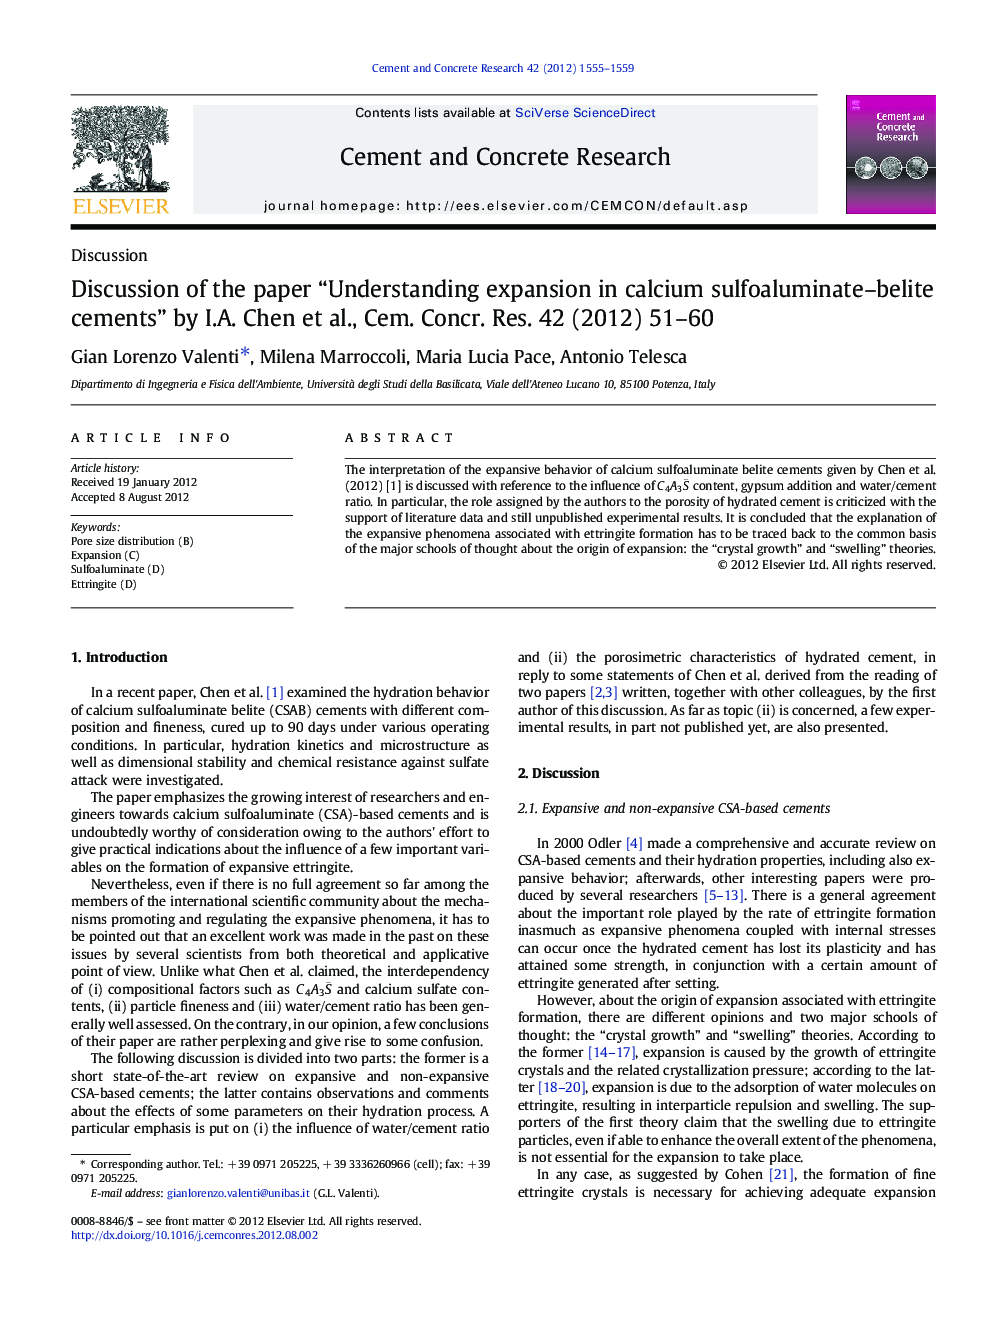 Discussion of the paper “Understanding expansion in calcium sulfoaluminate–belite cements” by I.A. Chen et al., Cem. Concr. Res. 42 (2012) 51–60